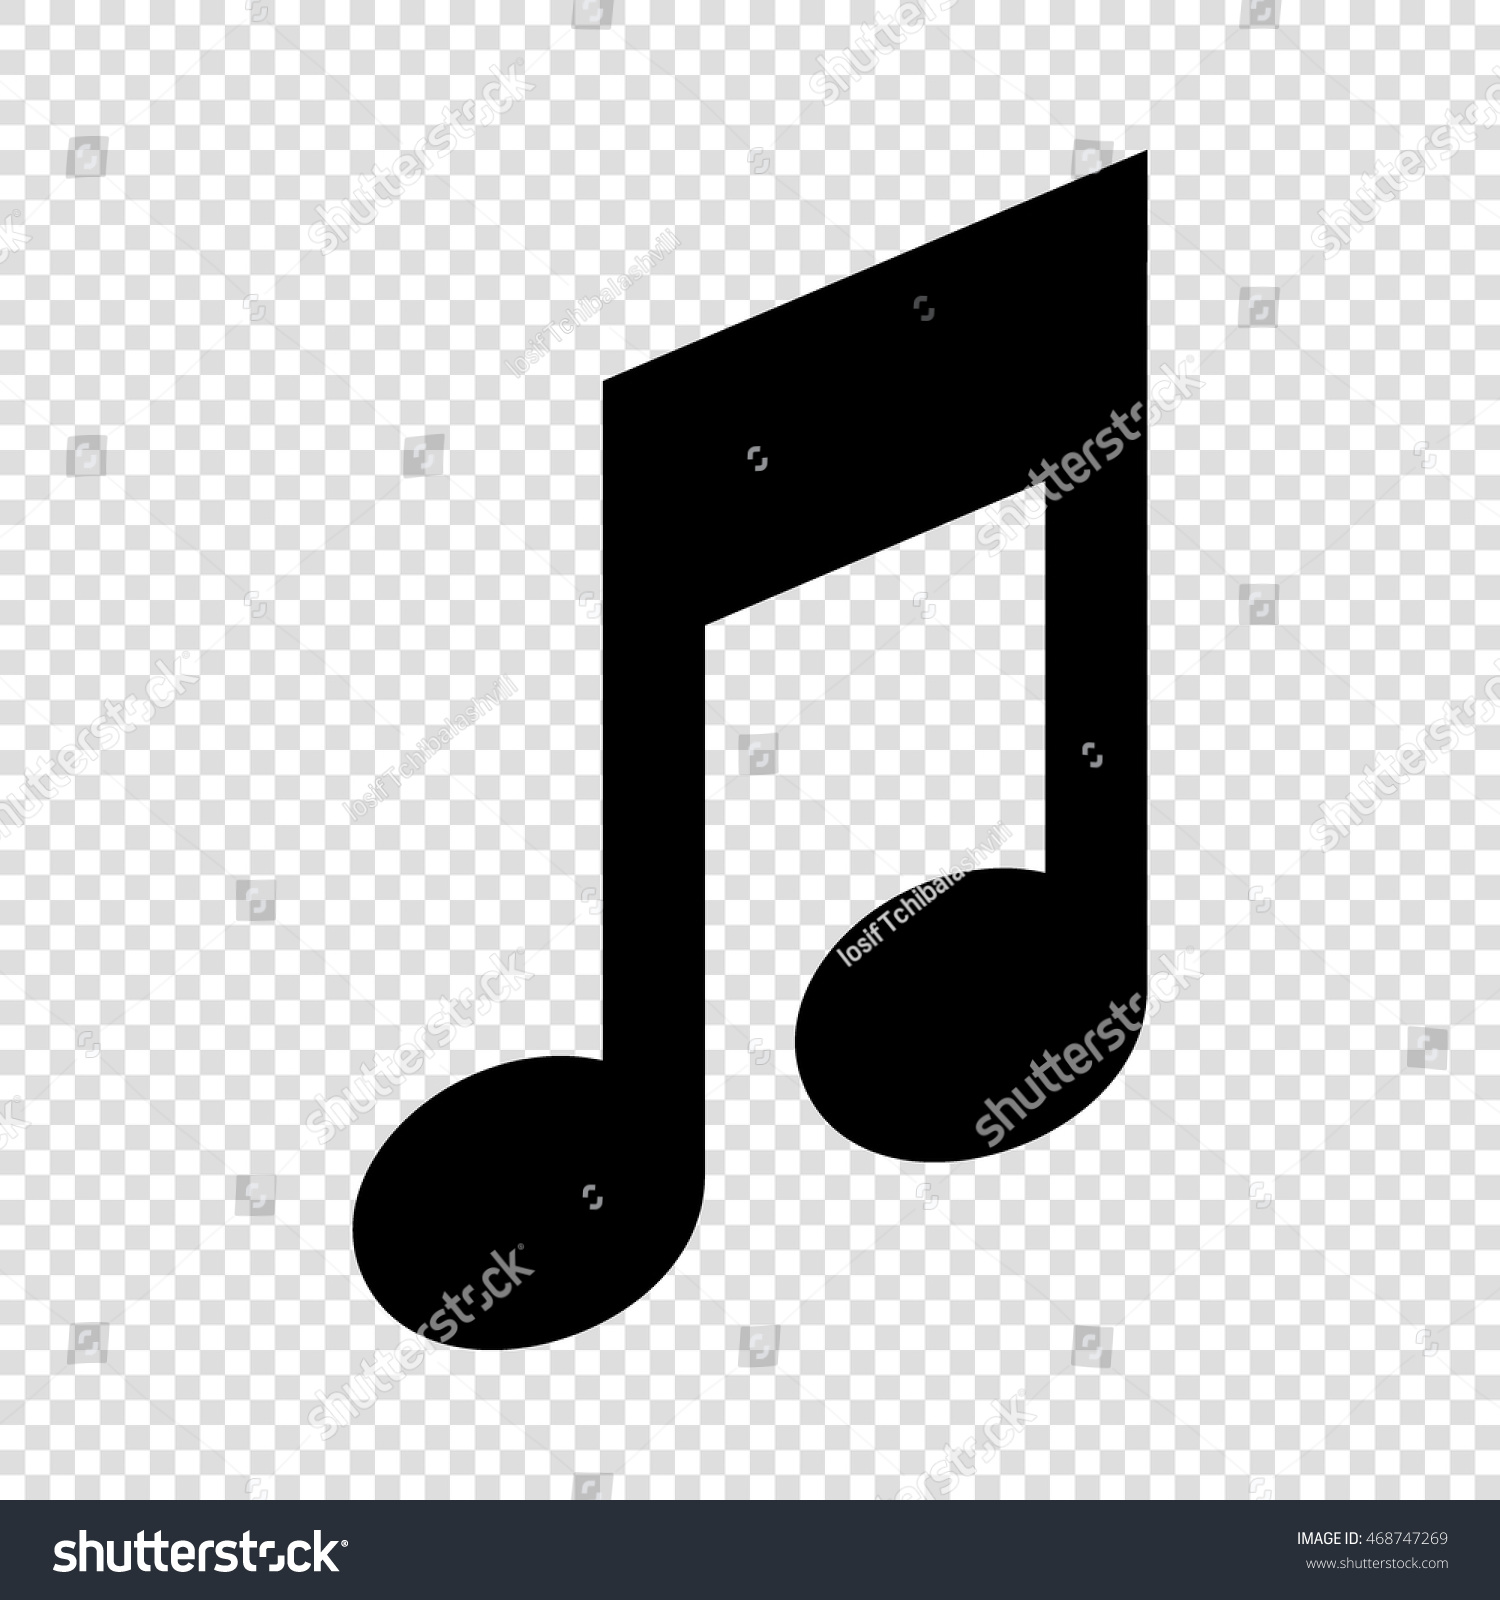 Music Note Icon Black On Transparent Stock Vector 468747269 - Shutterstock